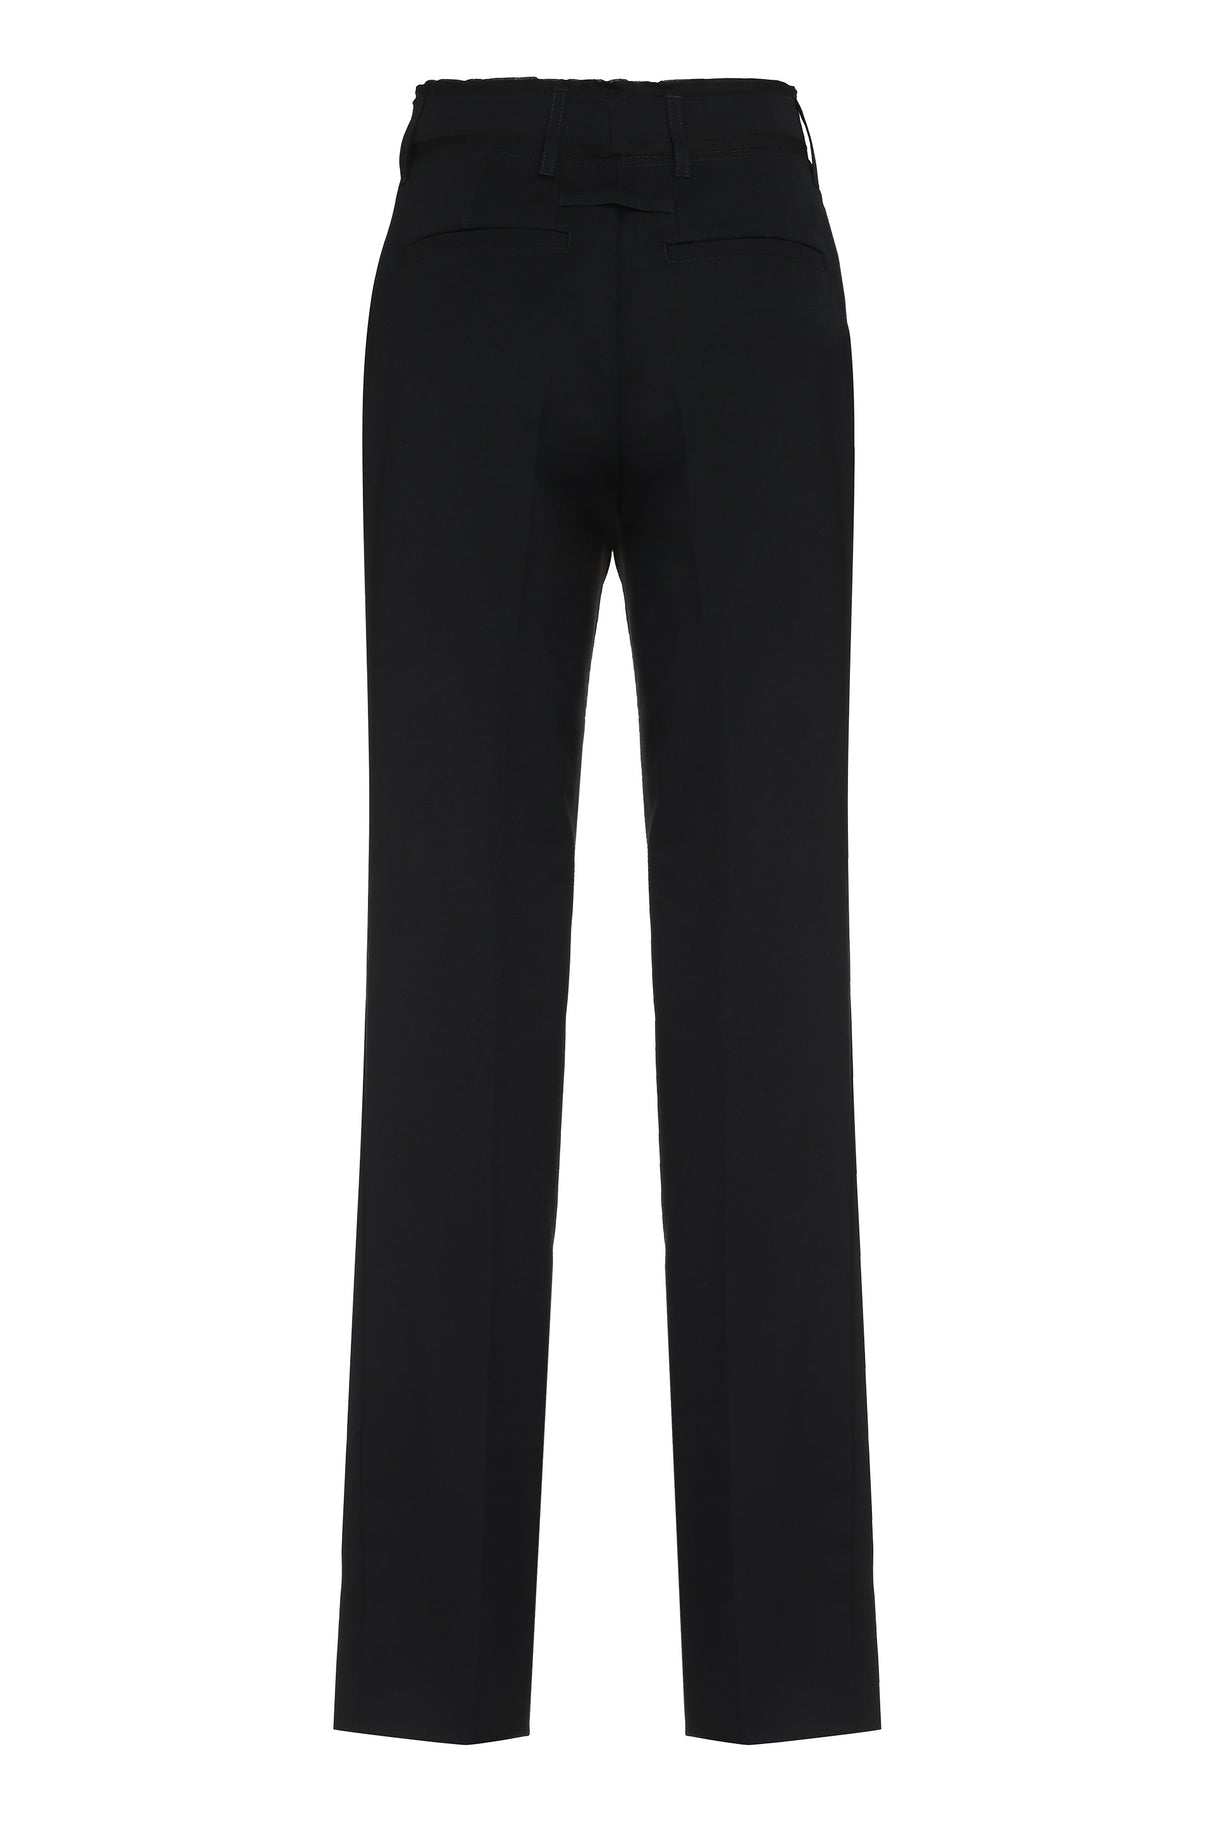 Women's Black Wool Trousers from Le Chouchou FW23 Collection